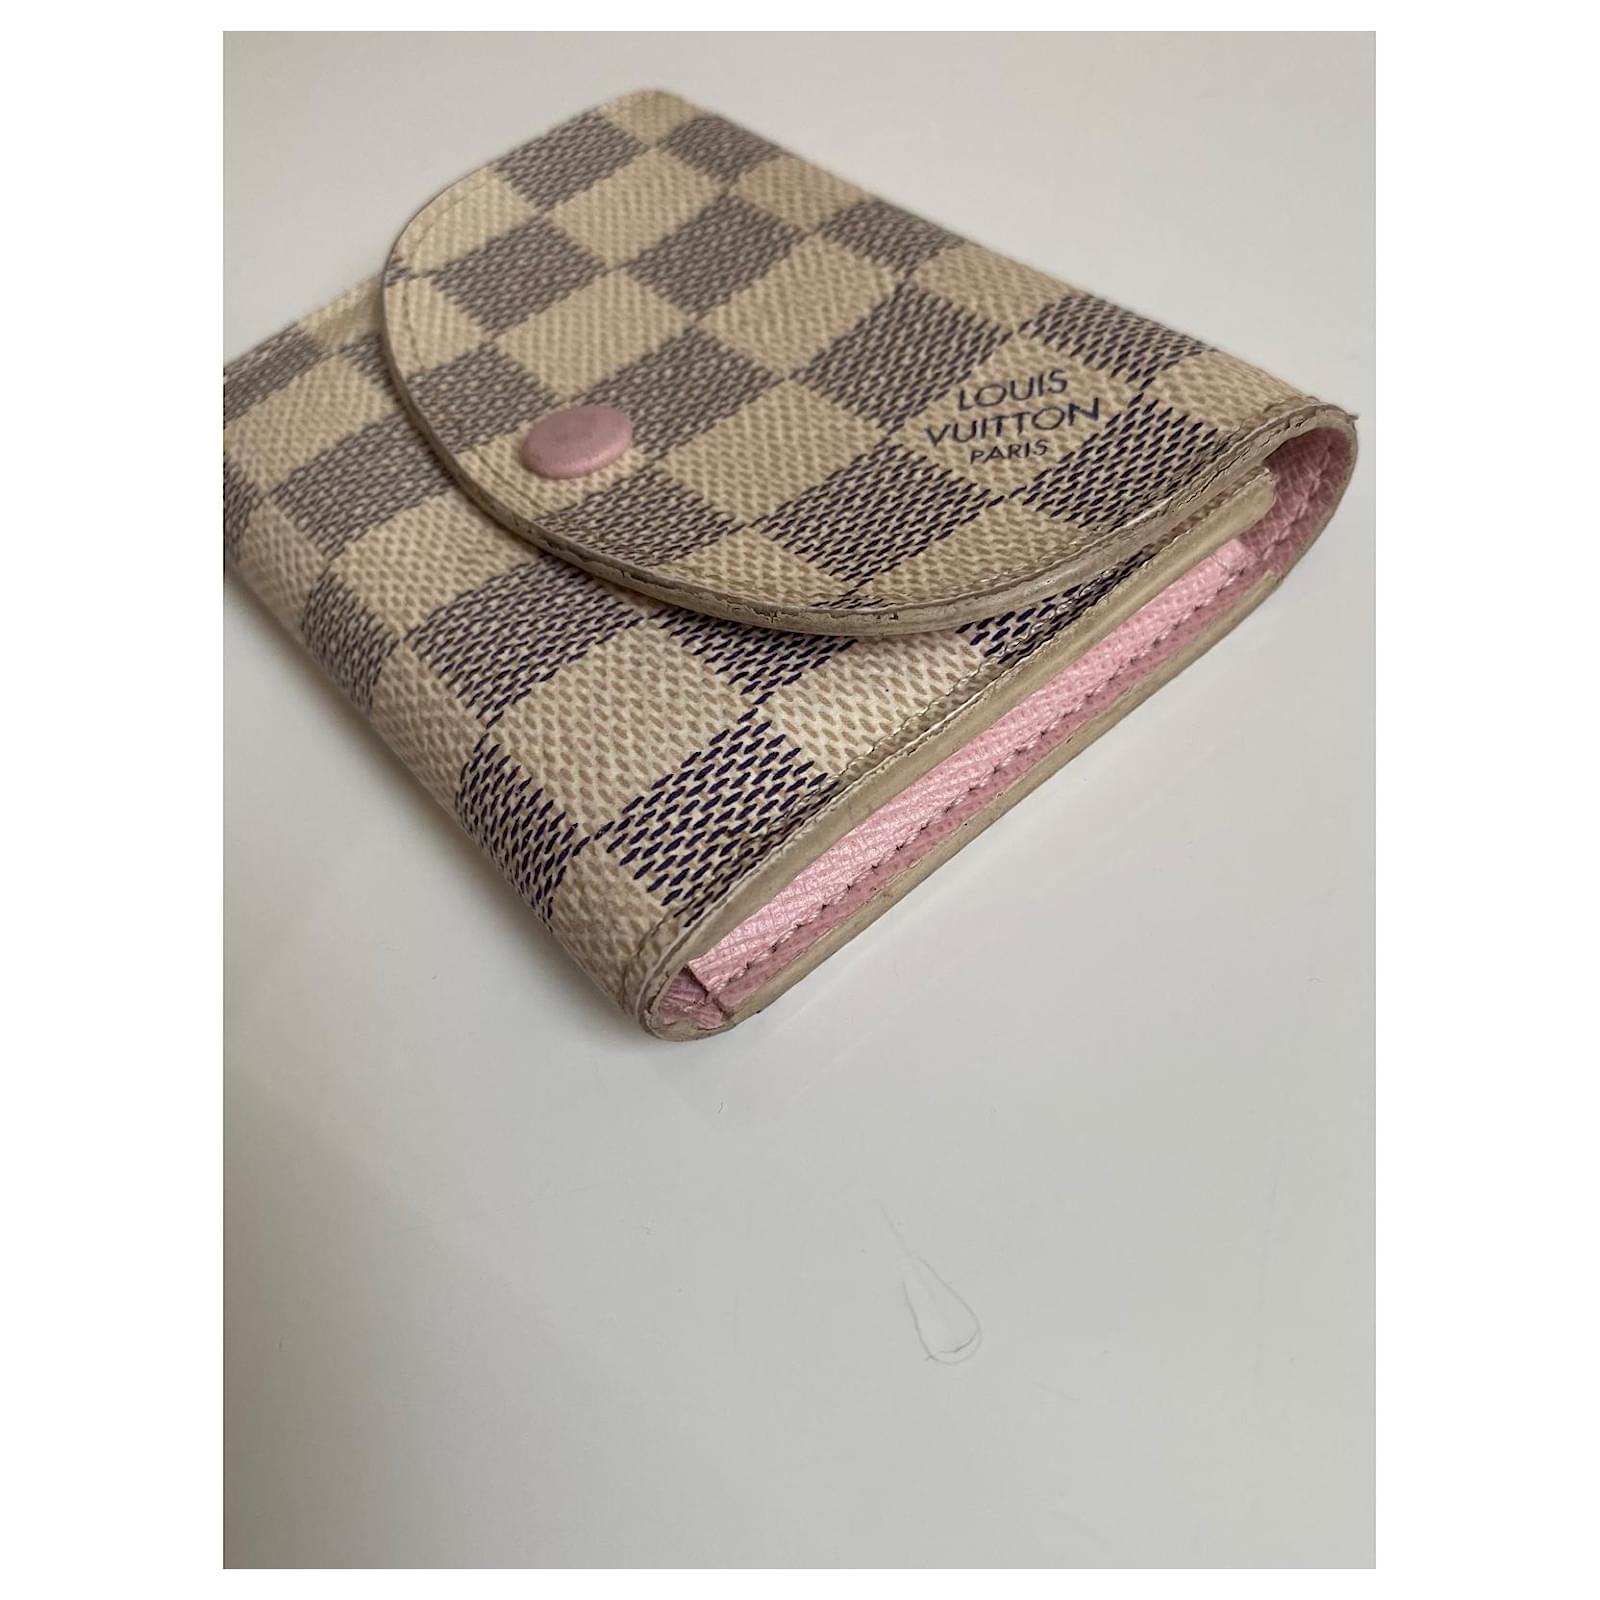 HER Authentic - Louis Vuitton Monogram Rosalie Coin Purse Rose Ballerine is  on our website for $300. Comes with the box and dust bag. | Facebook